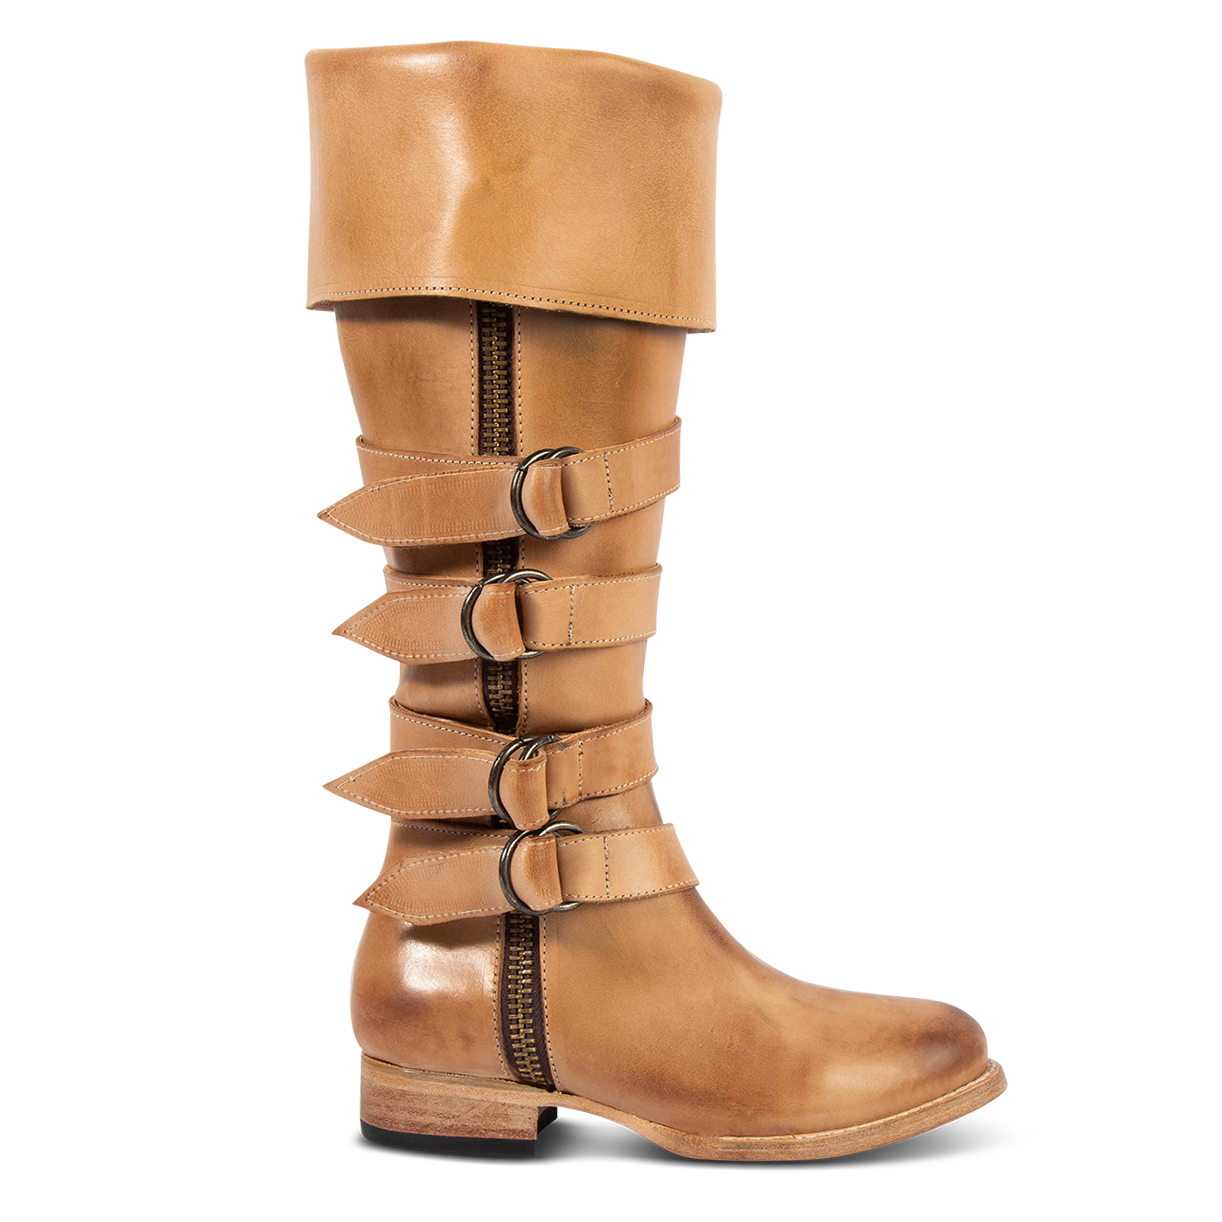 FREEBIRD women's Risky beige fold-over tall leather boot with buckle loop detailing and zip closures